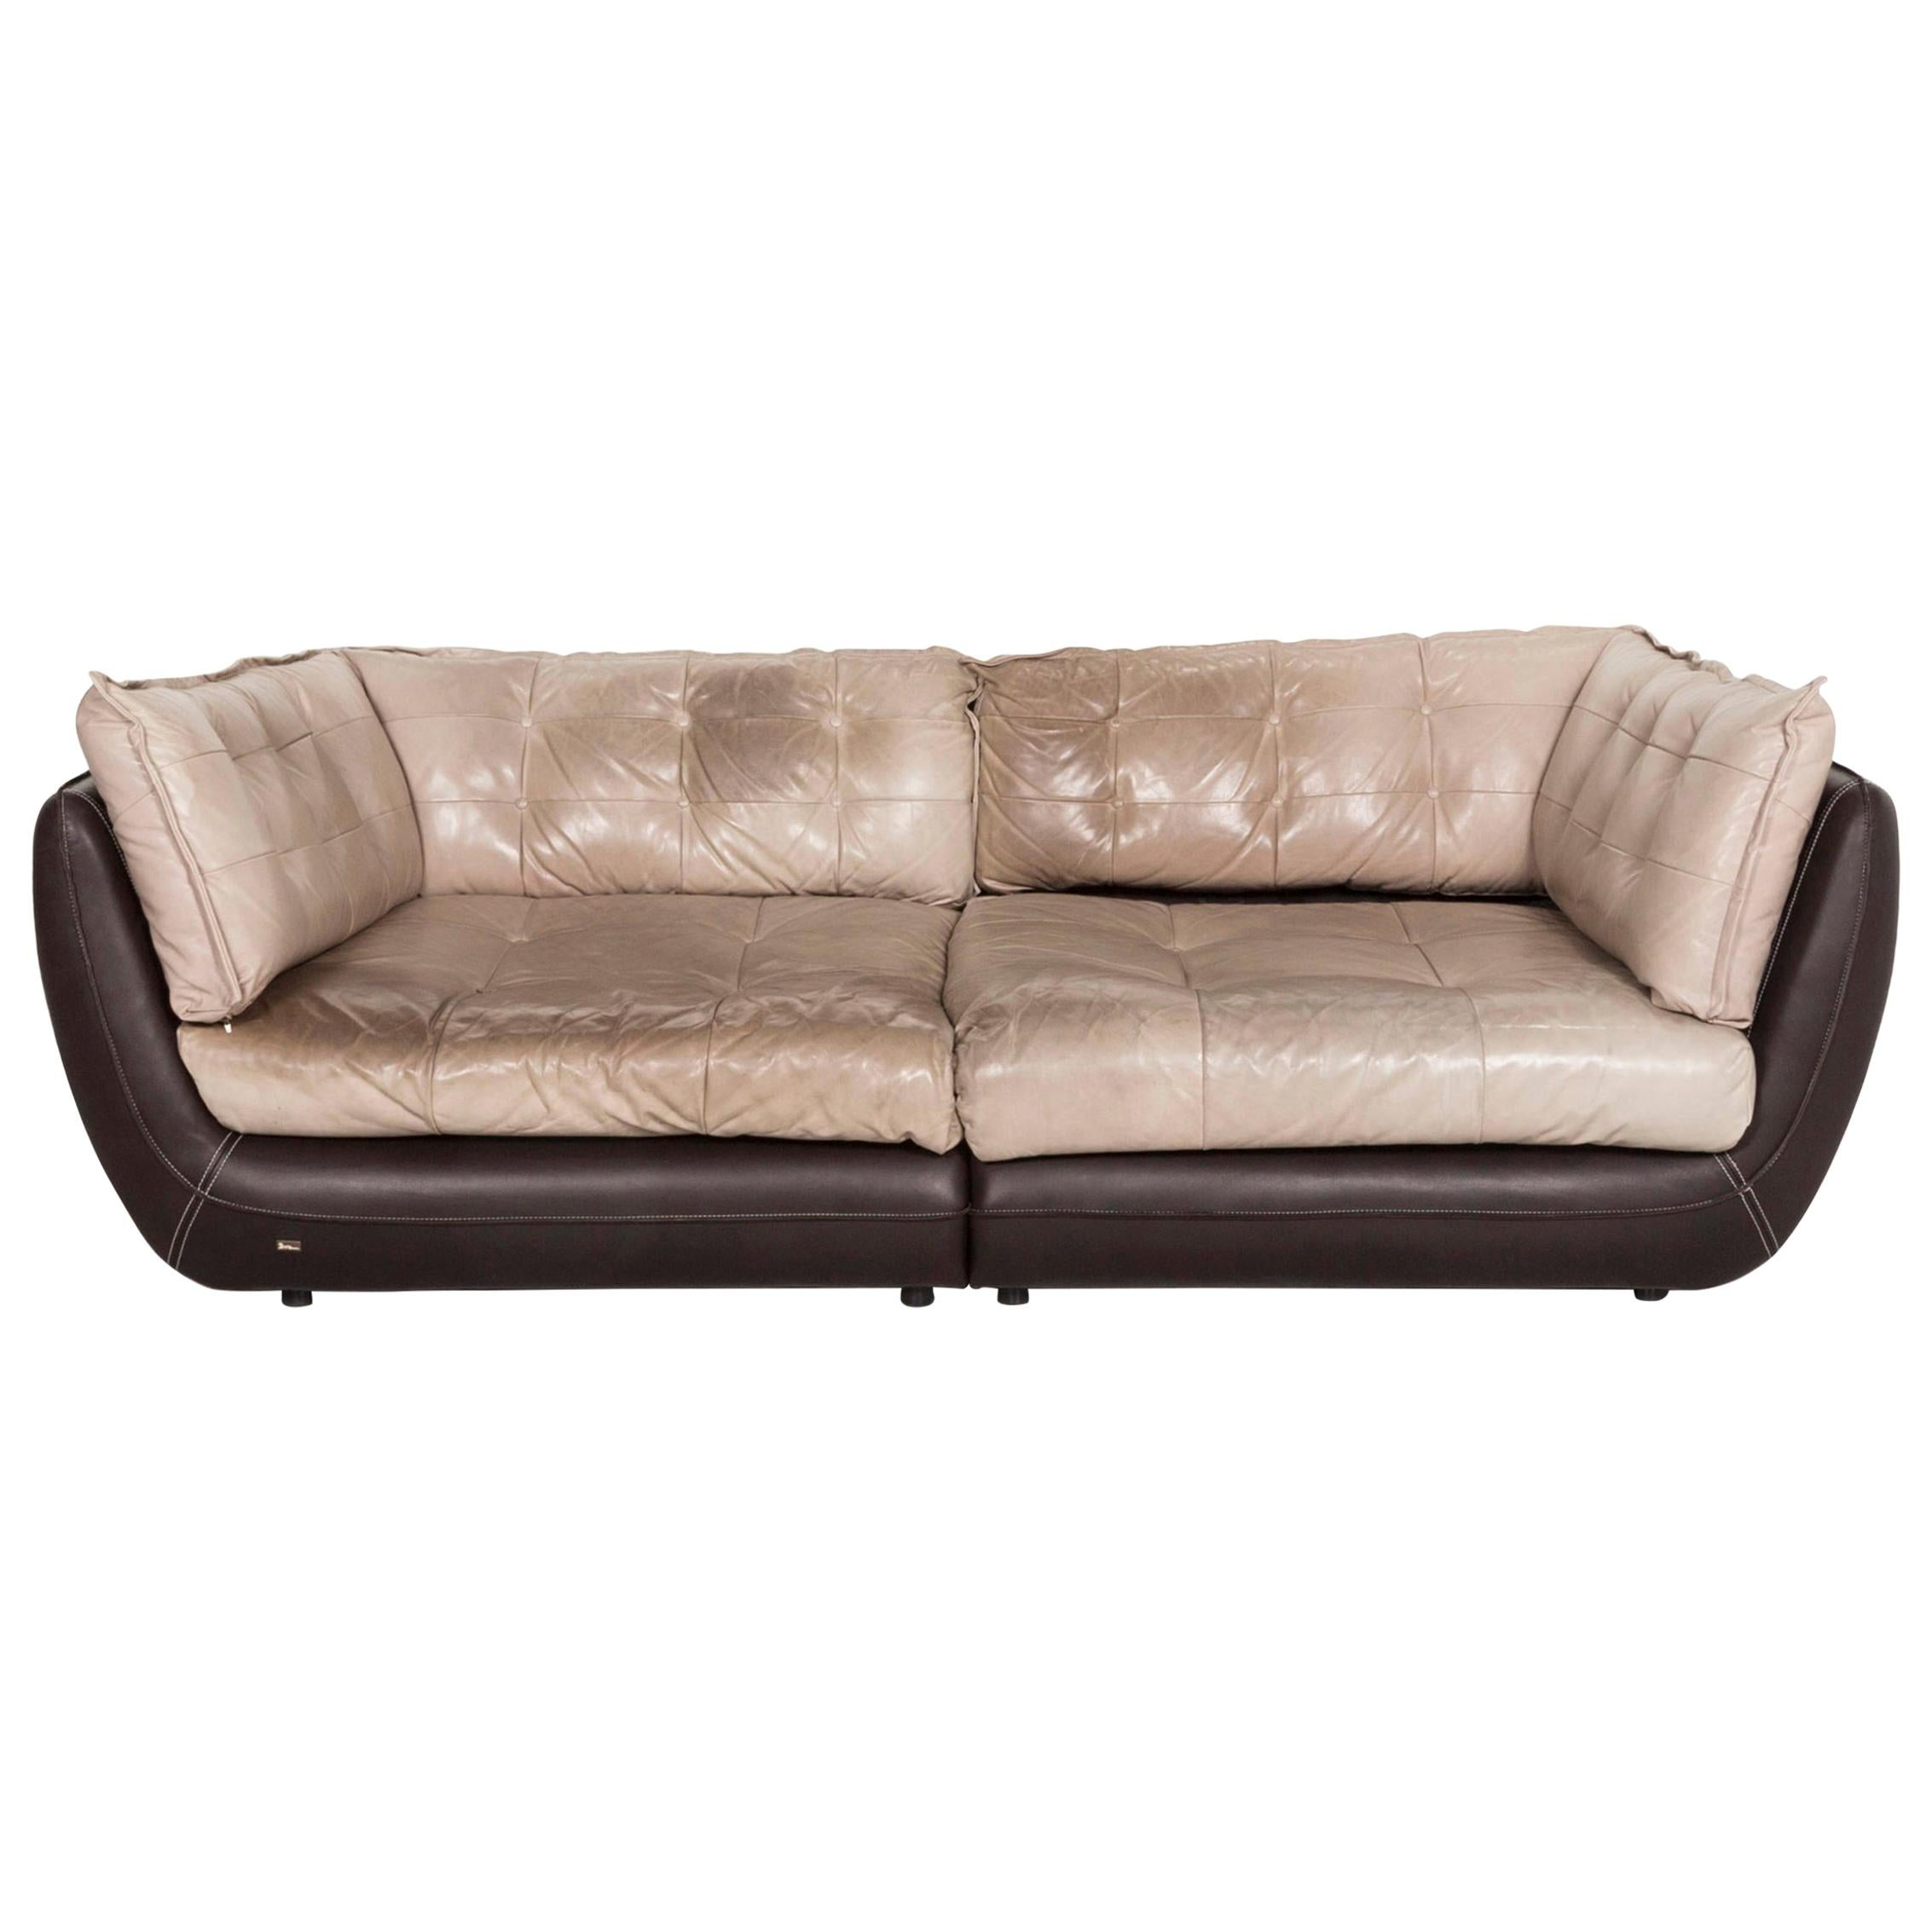 Bretz Cupcake Jepard Leather Sofa Brown Beige Four-Seat Couch For Sale